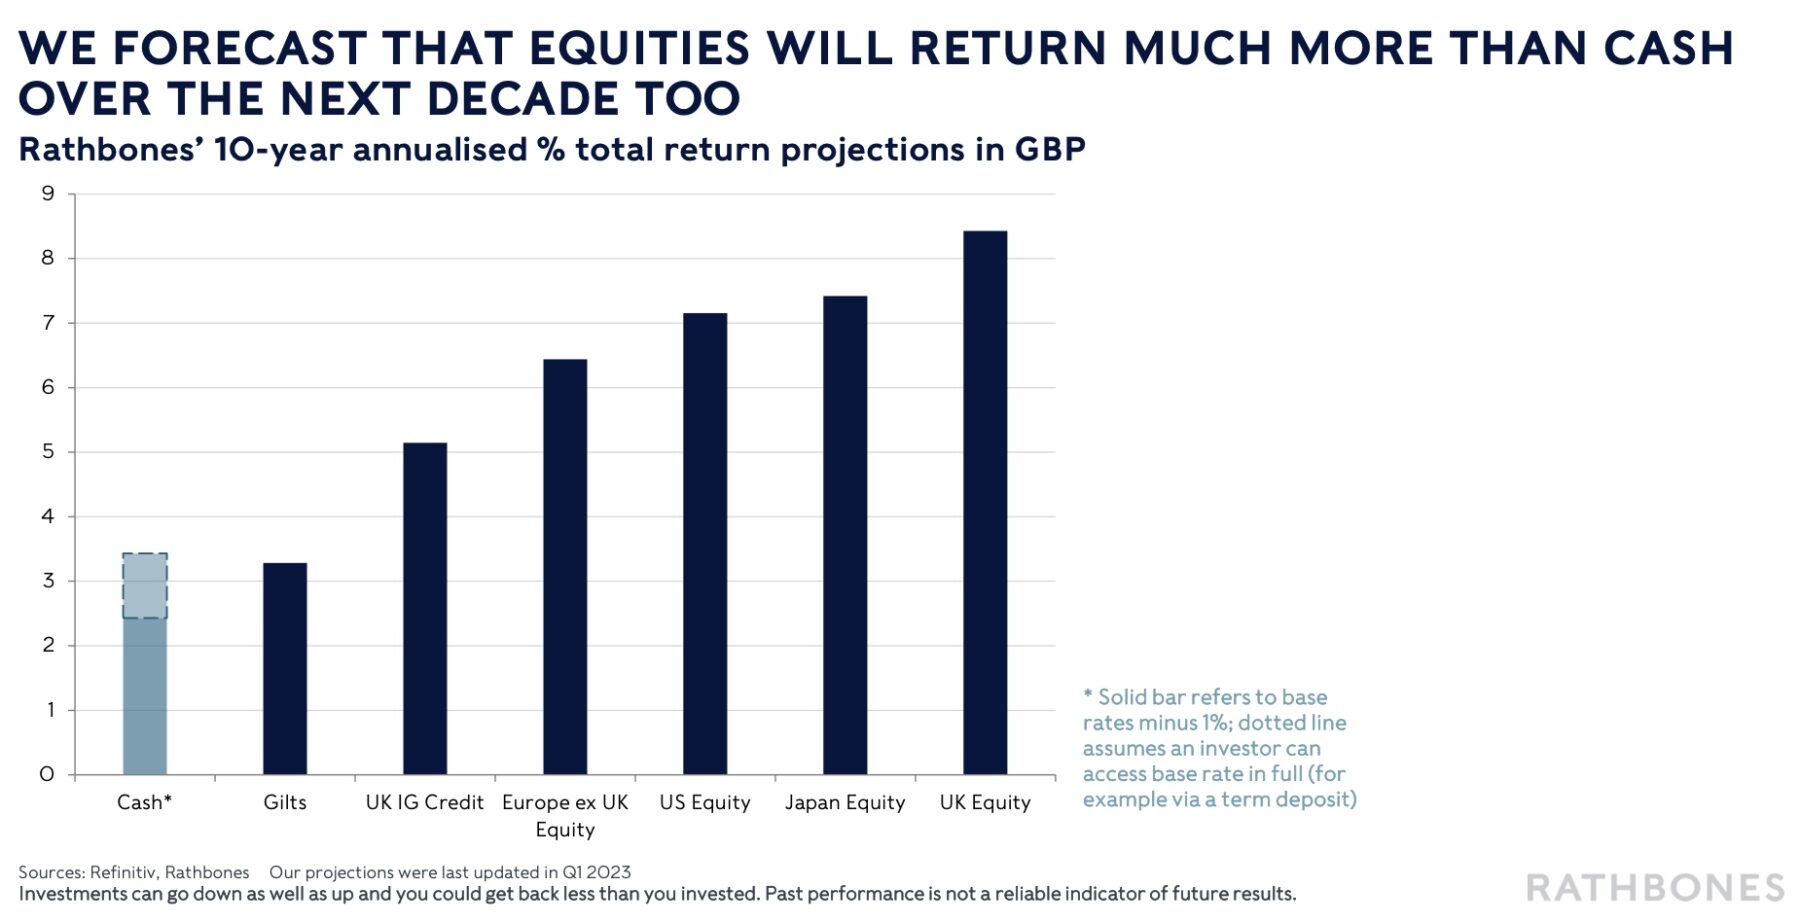 Equities will return more than cash